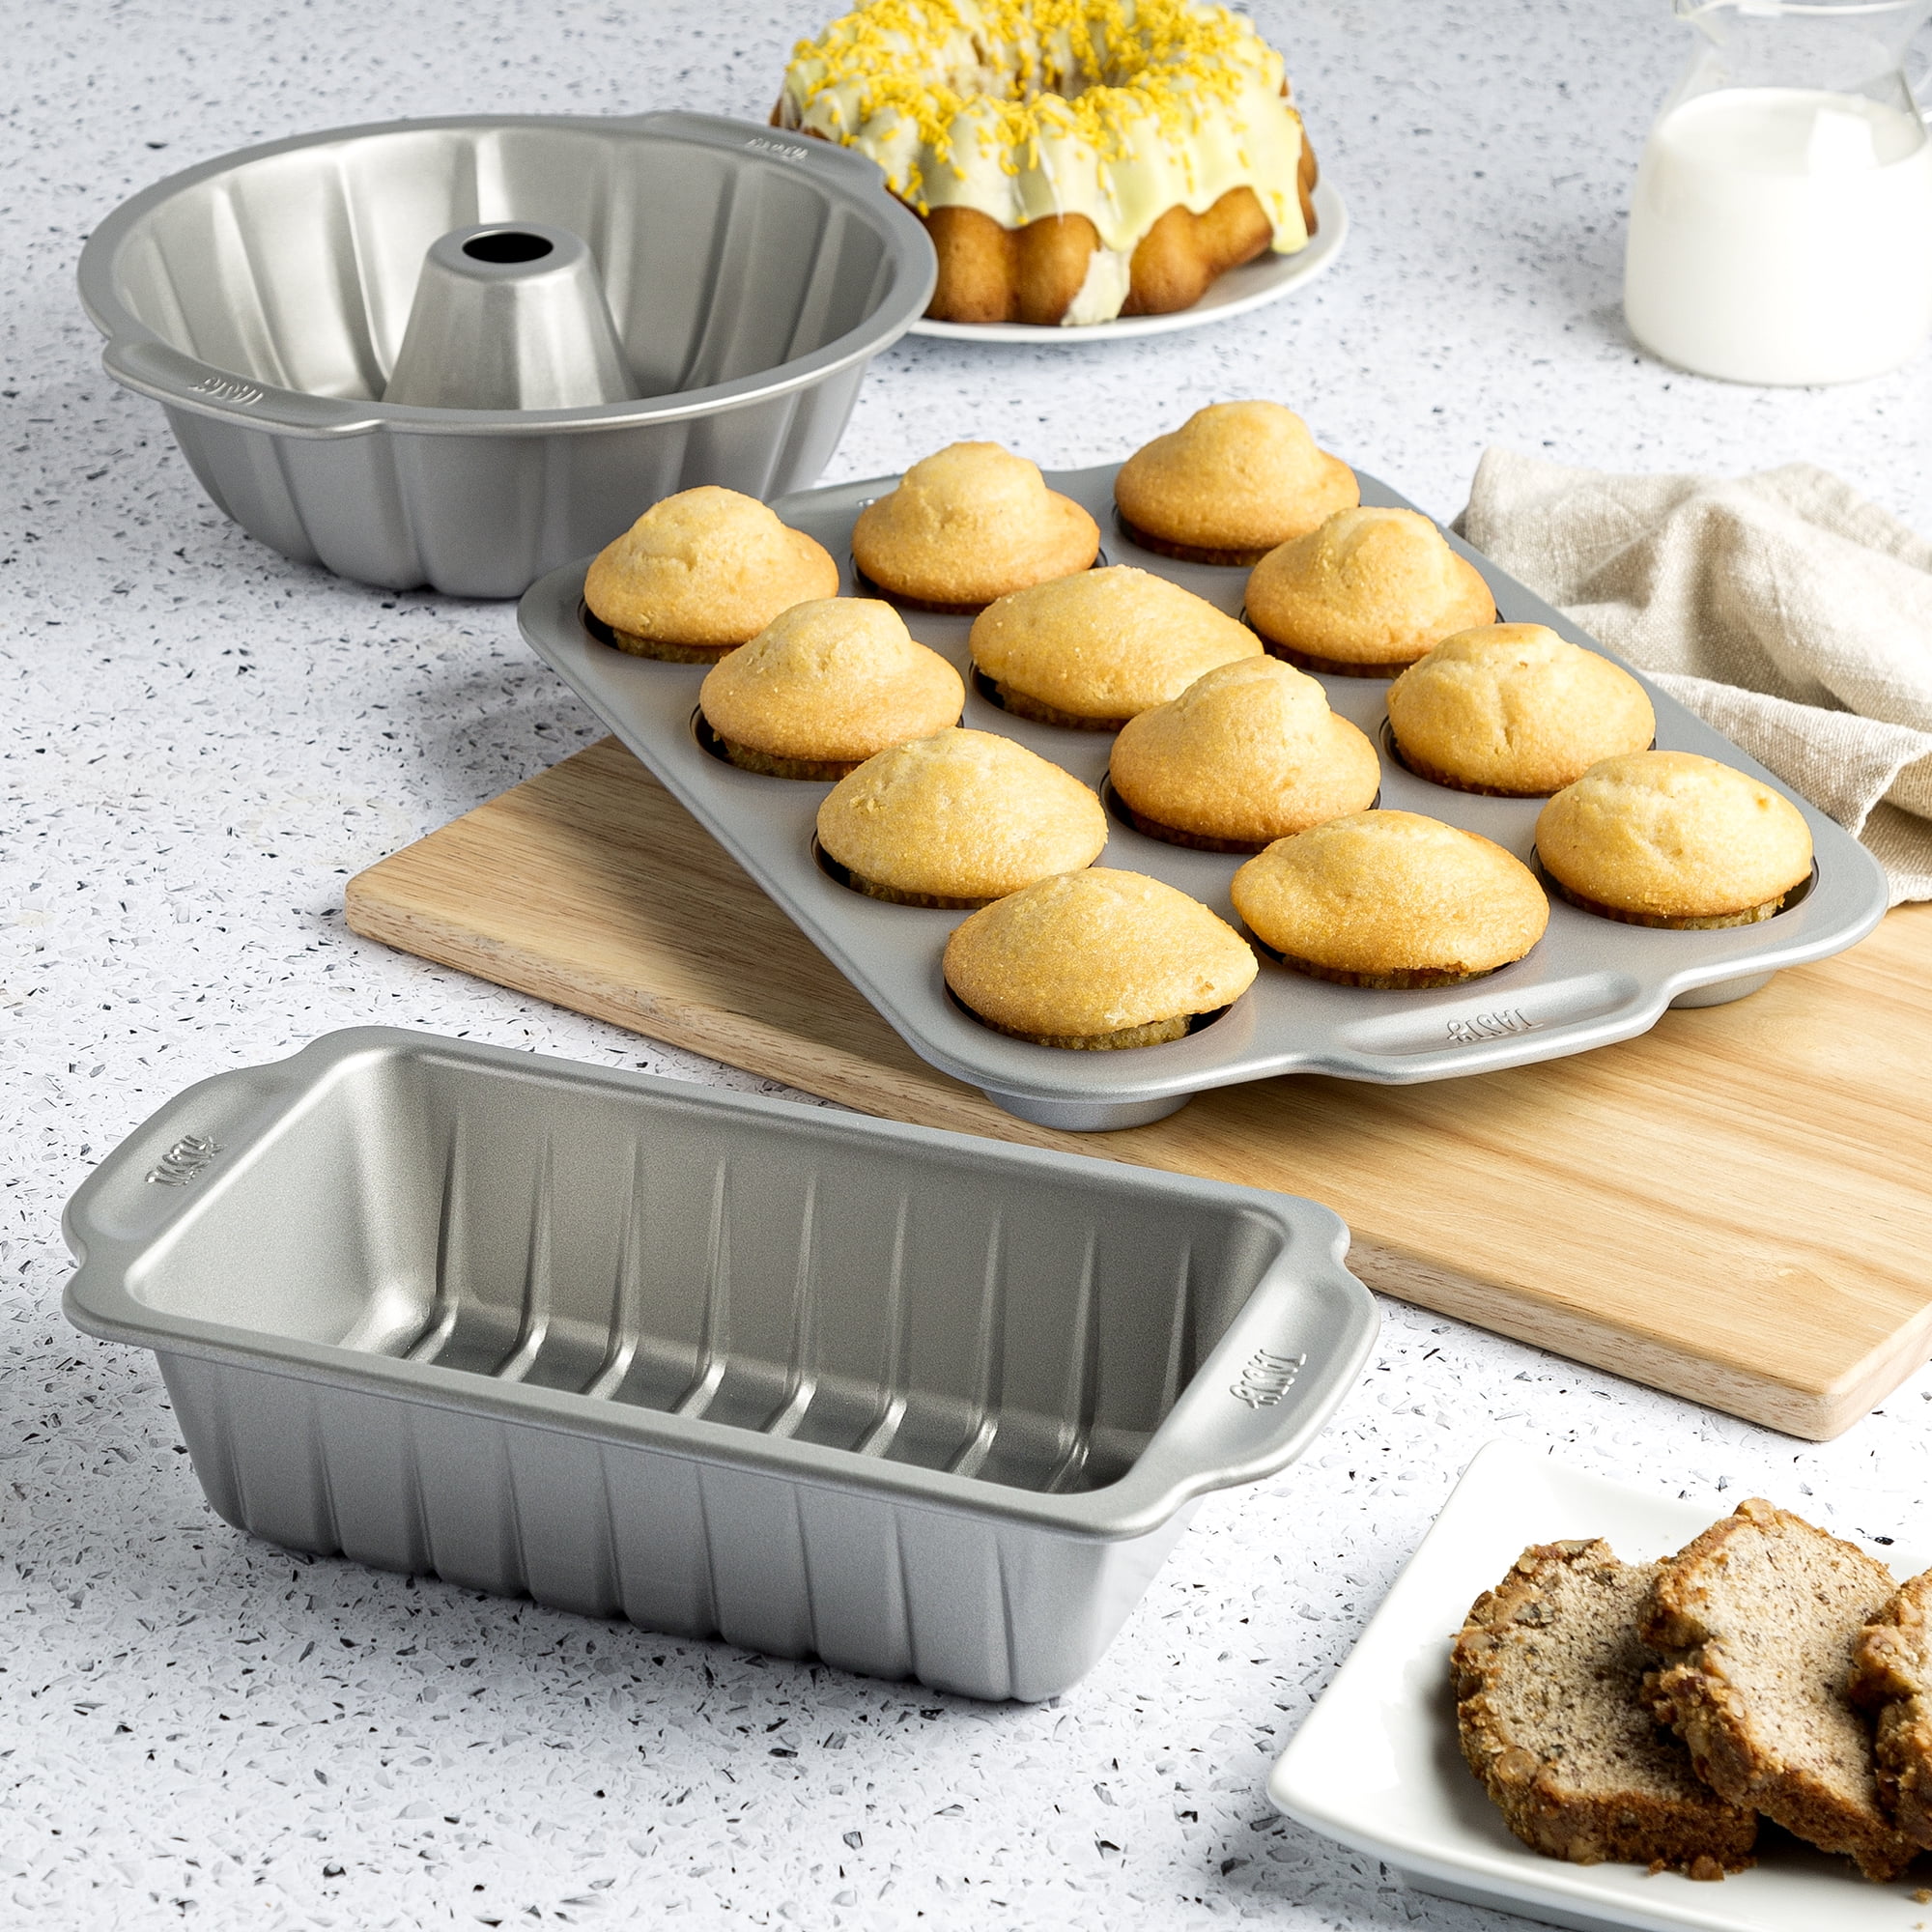 Tasty 3 Piece Carbon Steel Baking Set: 9x5 Loaf Pan, 9 Fluted Cake Pan,  and 12 Cup Muffin Pan 